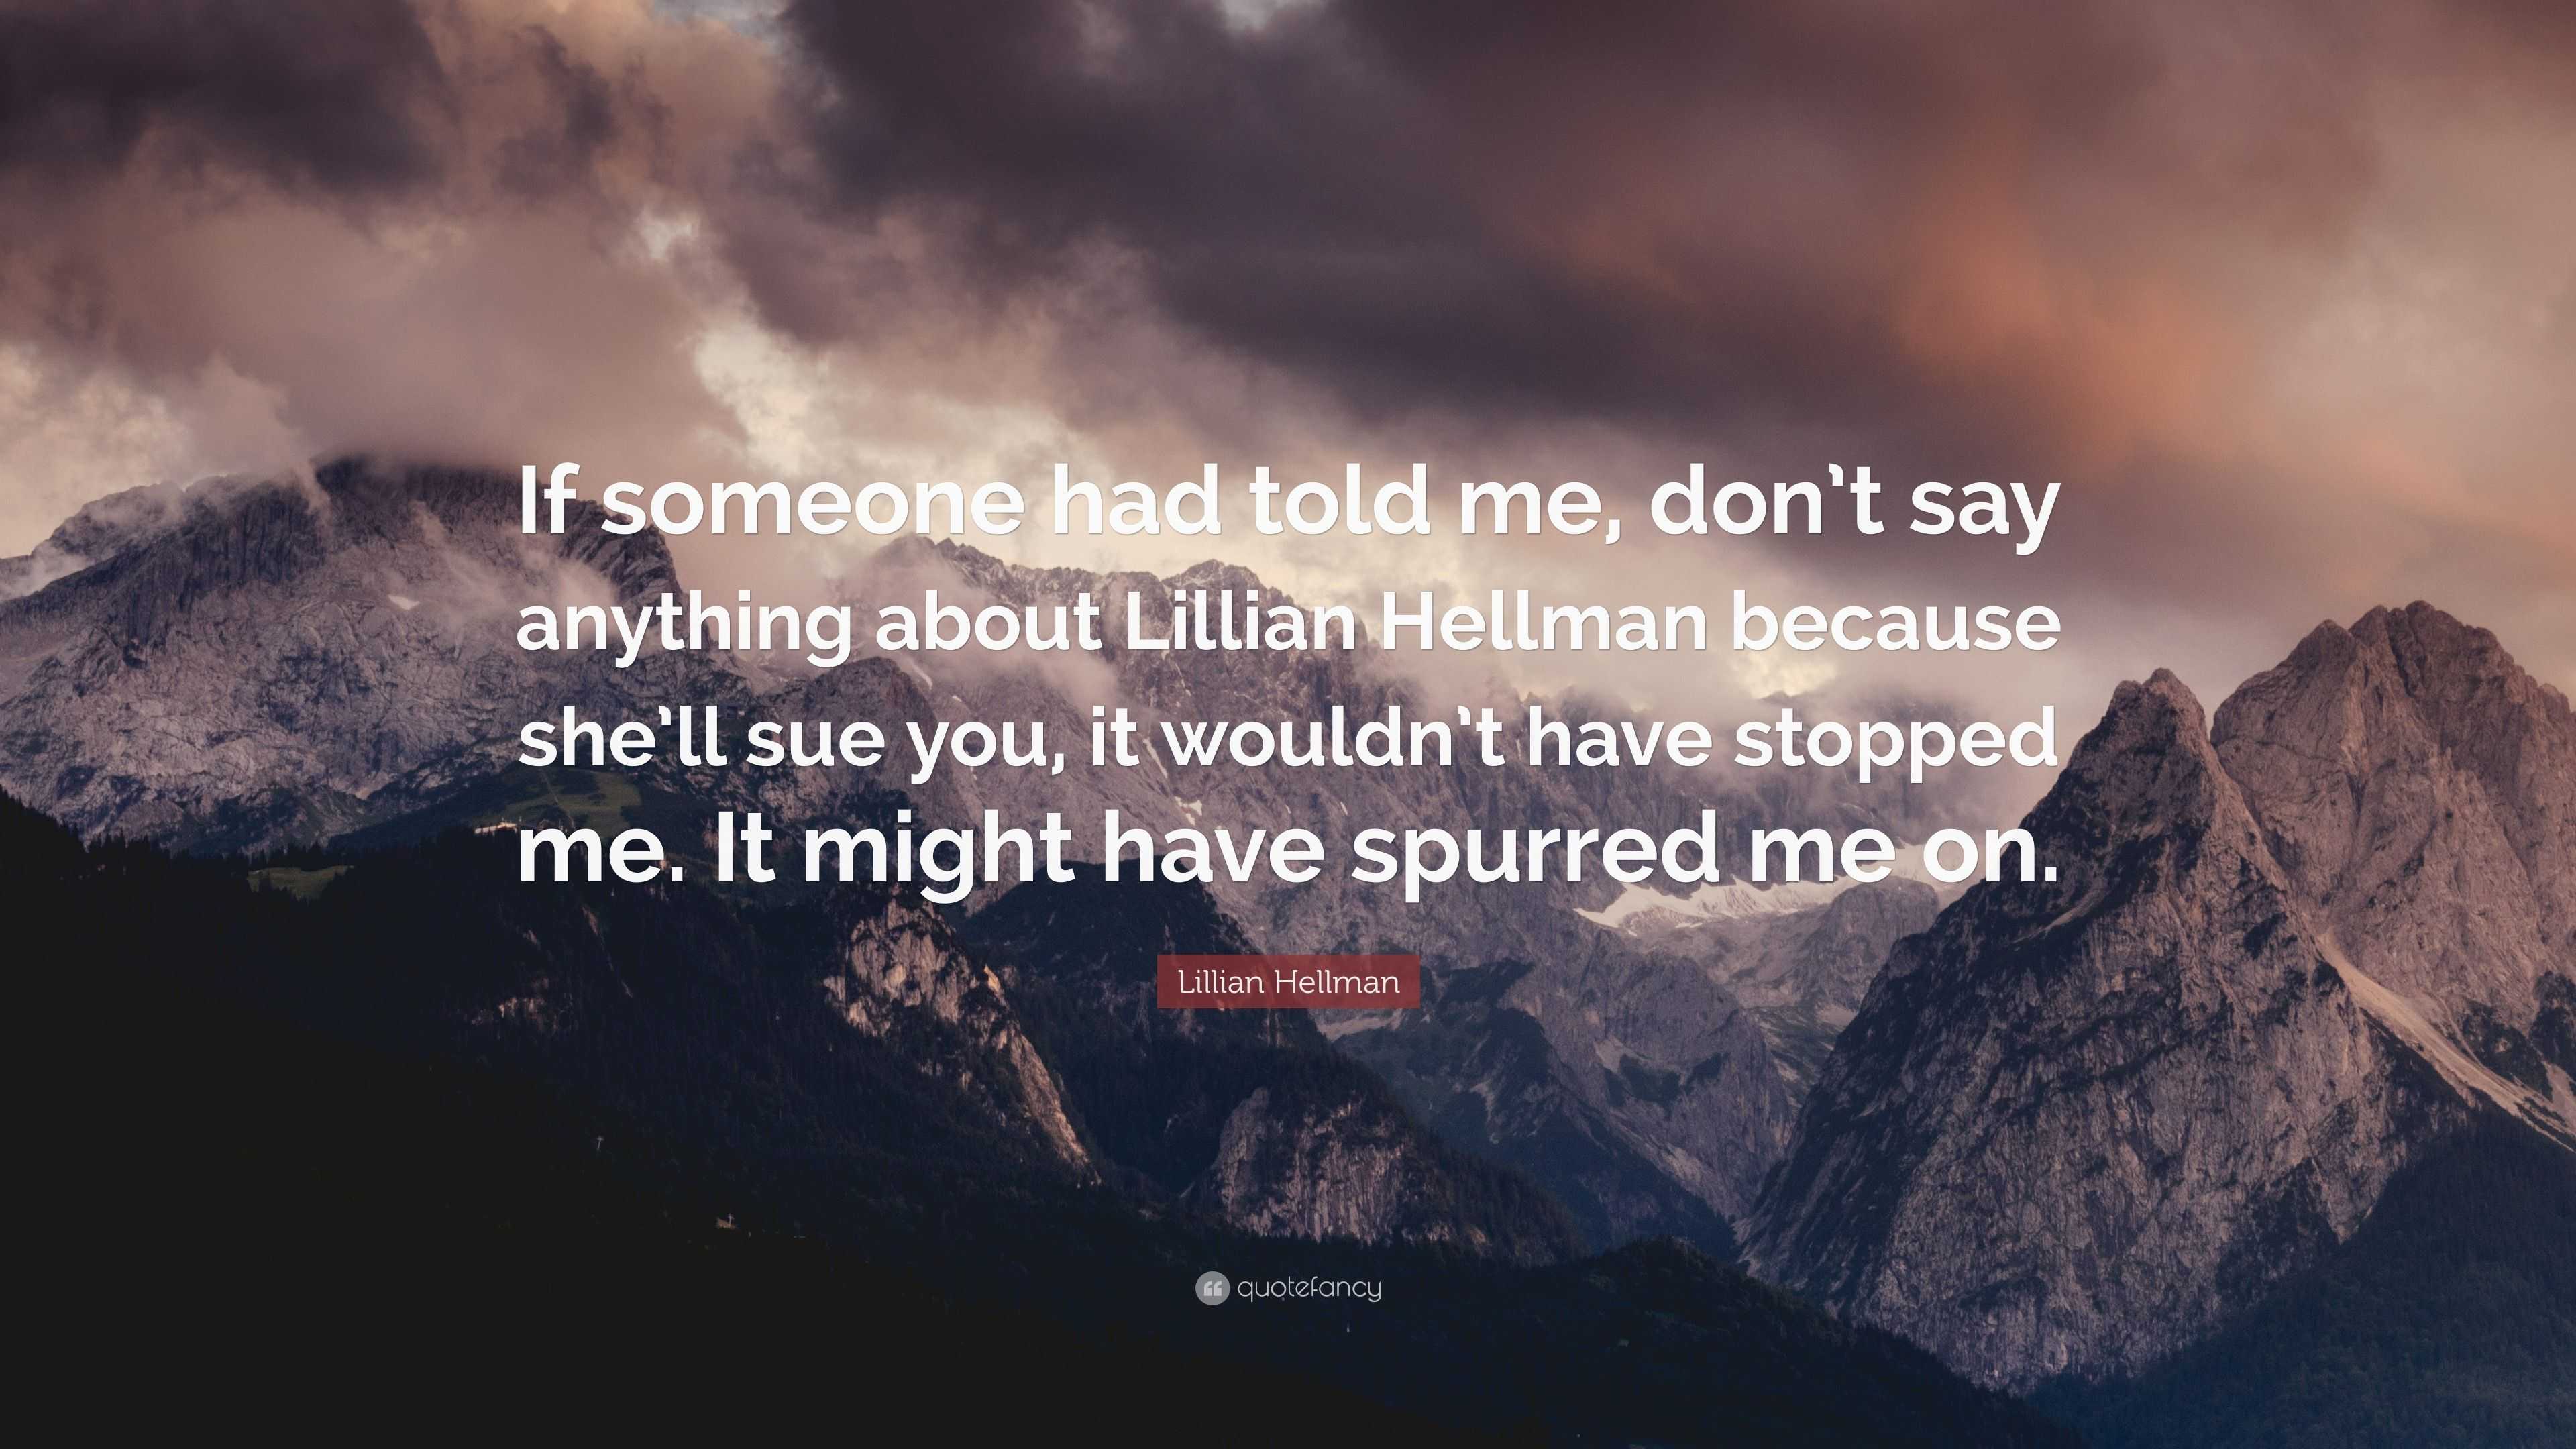 Lillian Hellman Quote: “If someone had told me, don’t say anything ...